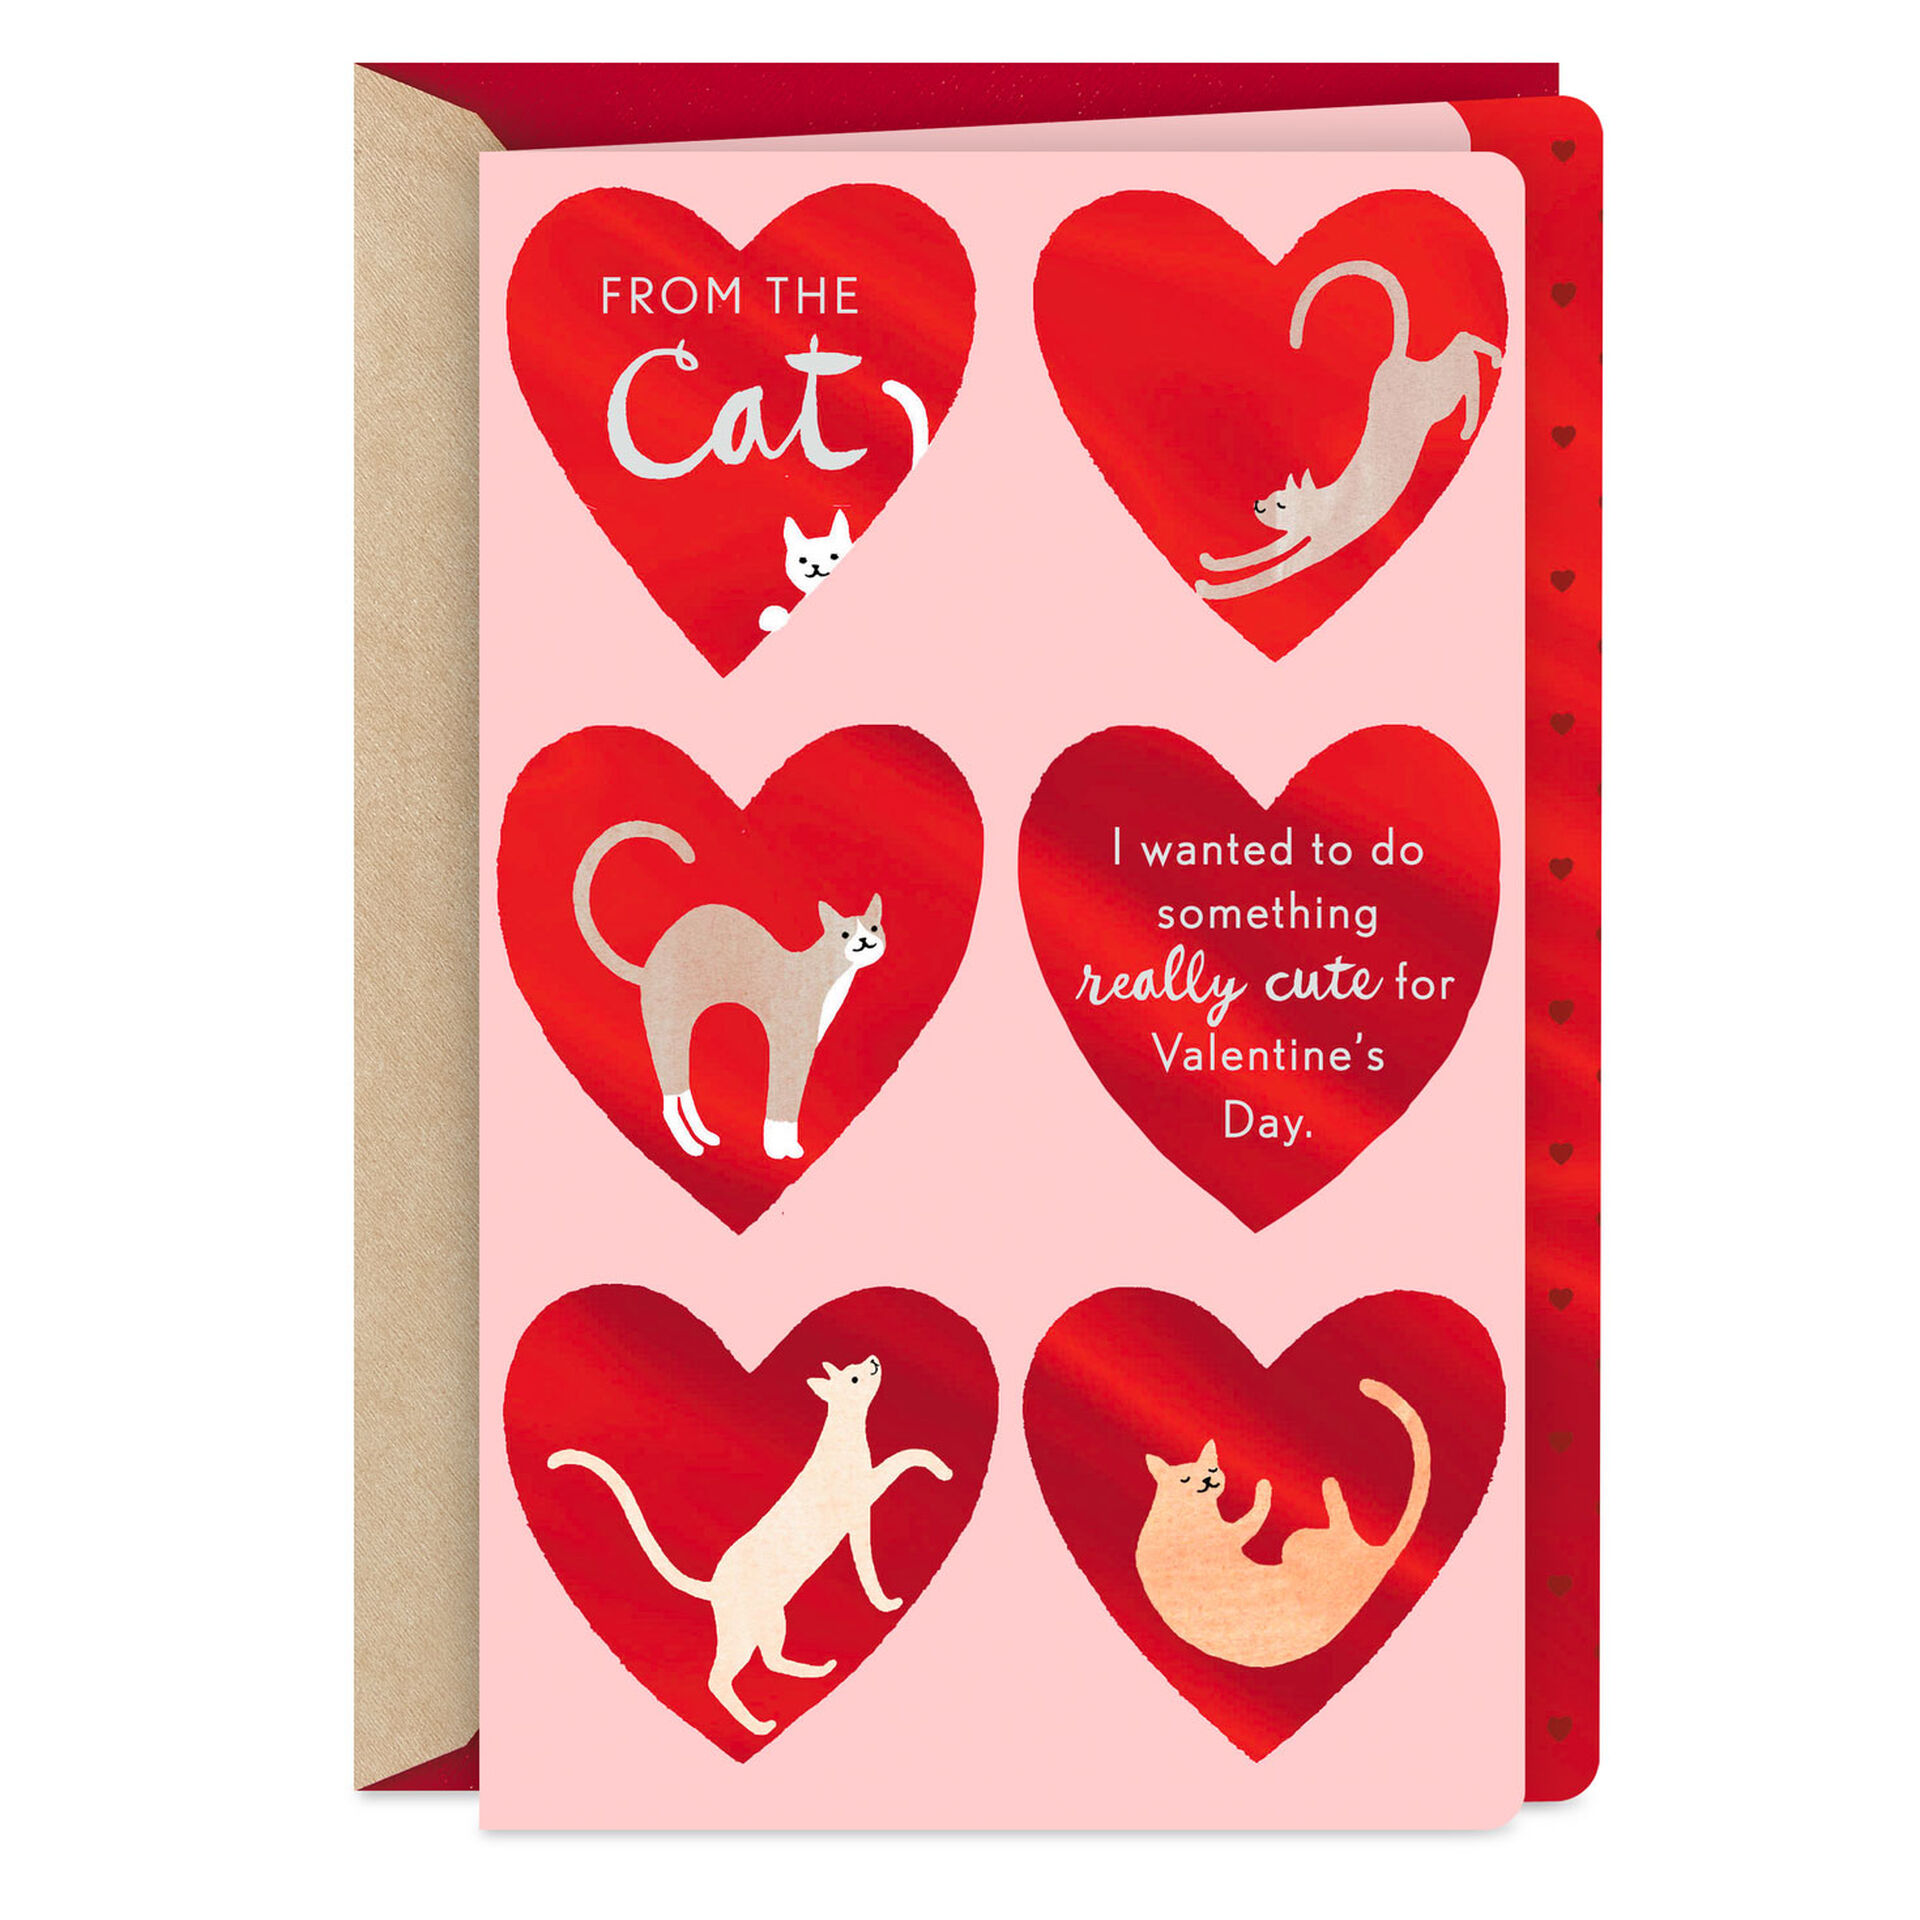 Cute-Cats-in-Hearts-Valentines-Day-Card-from-Cat_299VEE1957_01